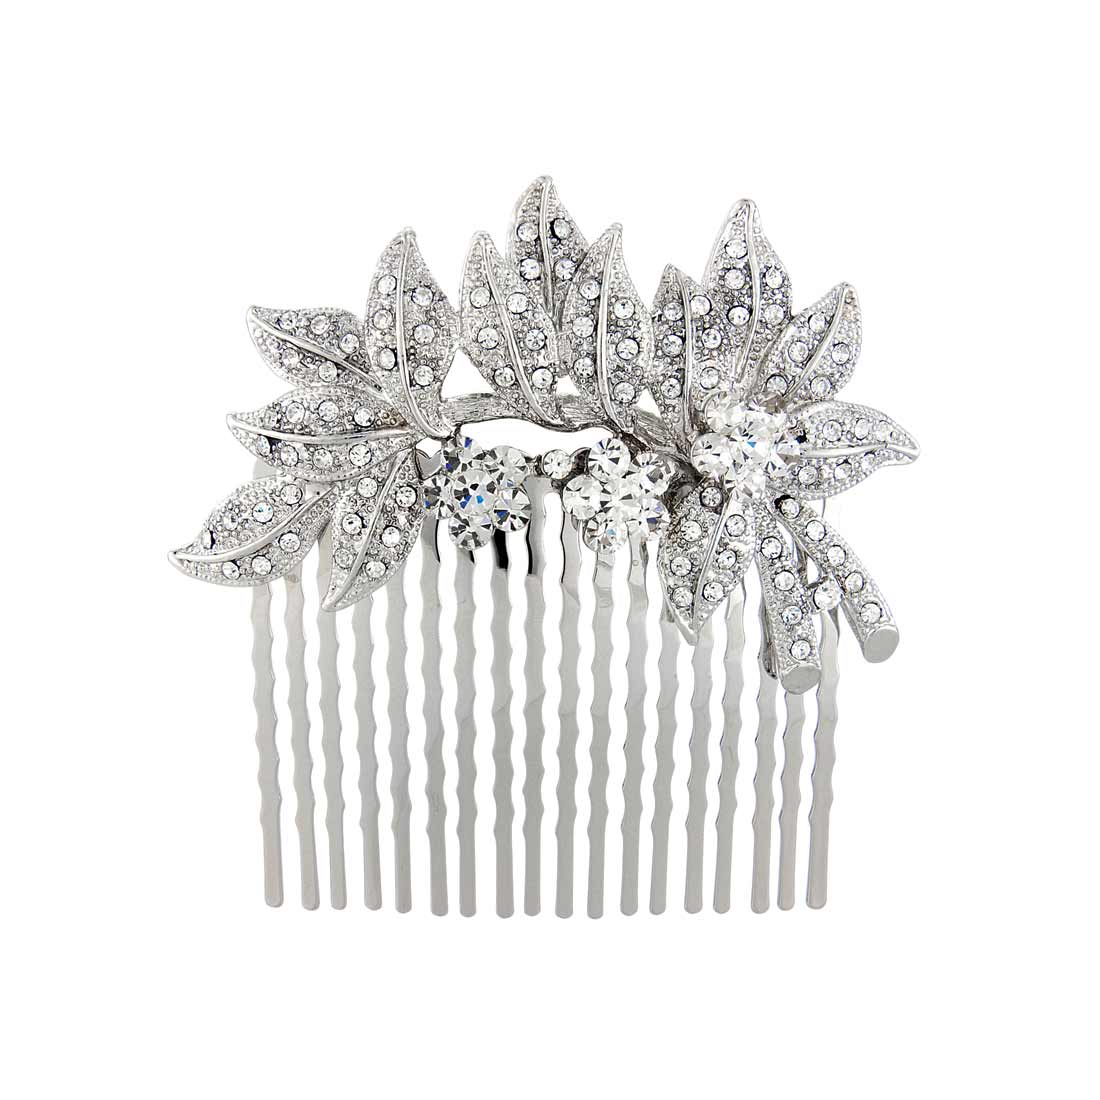 Leaves of Beauty Silver Crystal Hair Comb for Weddings